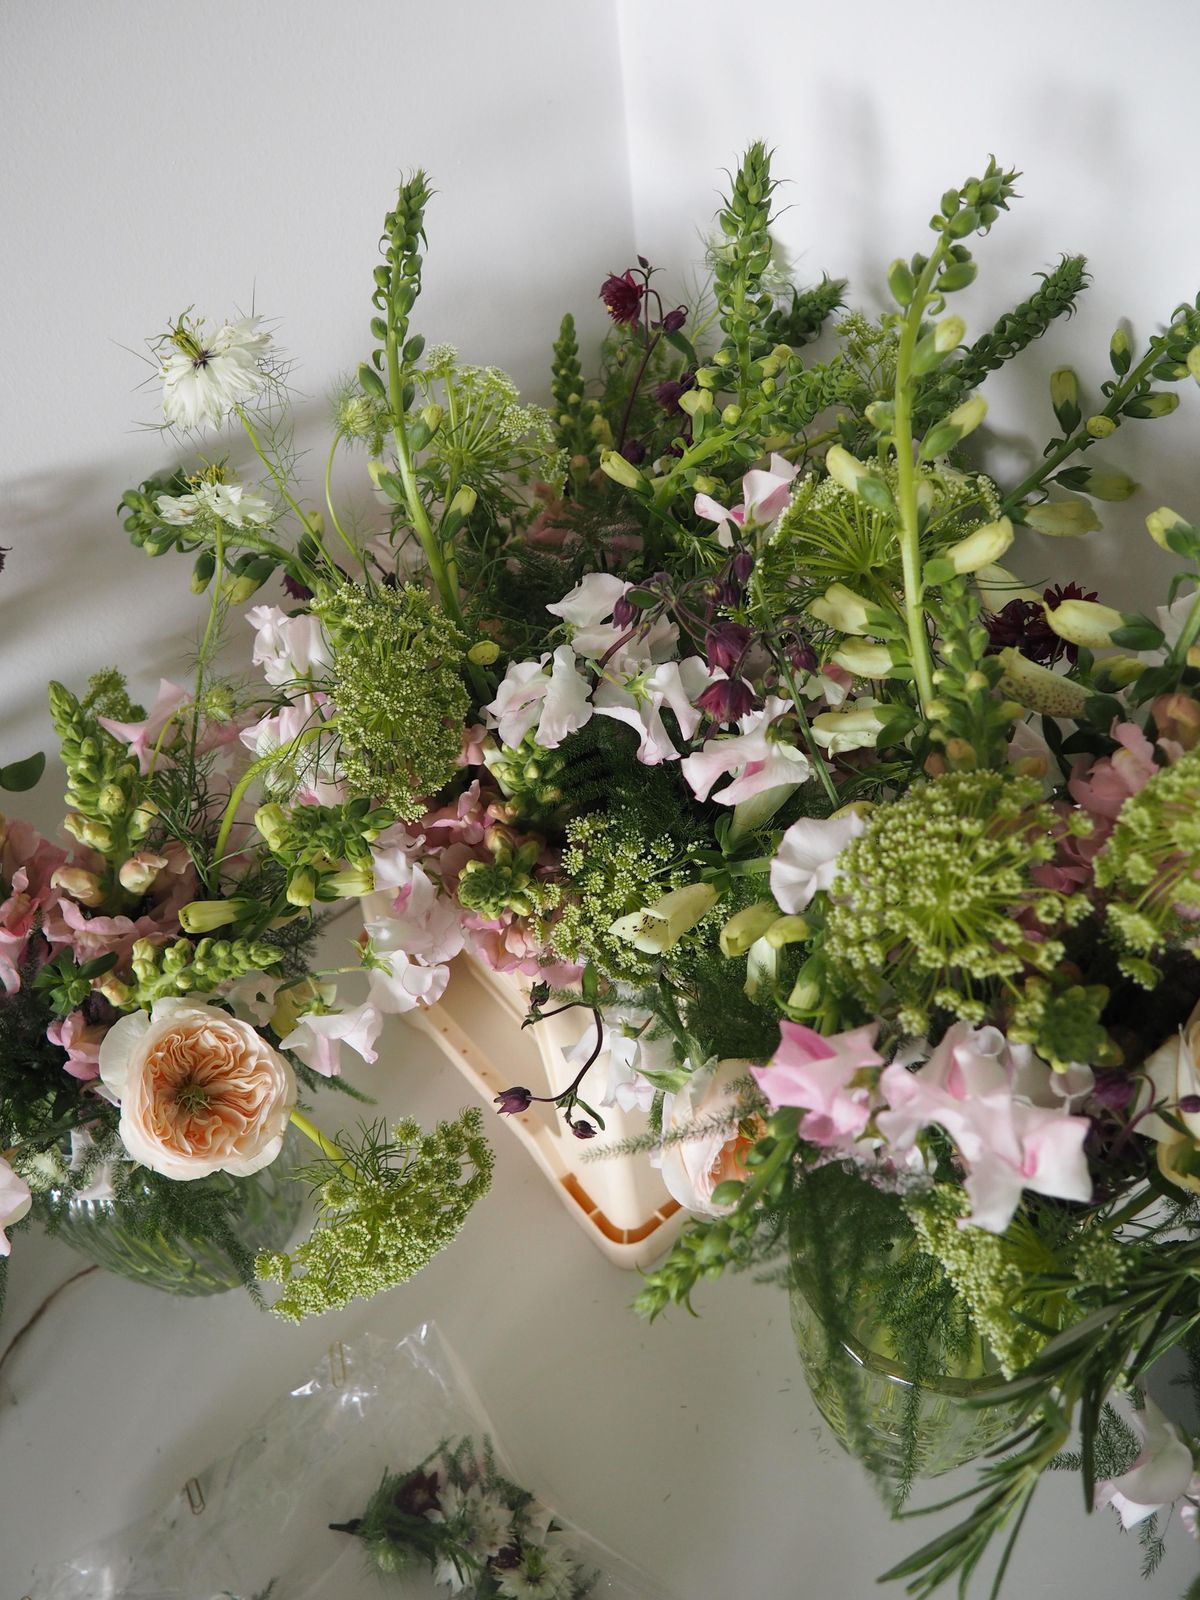 An introduction to floristry: seasonal bouquet workshop